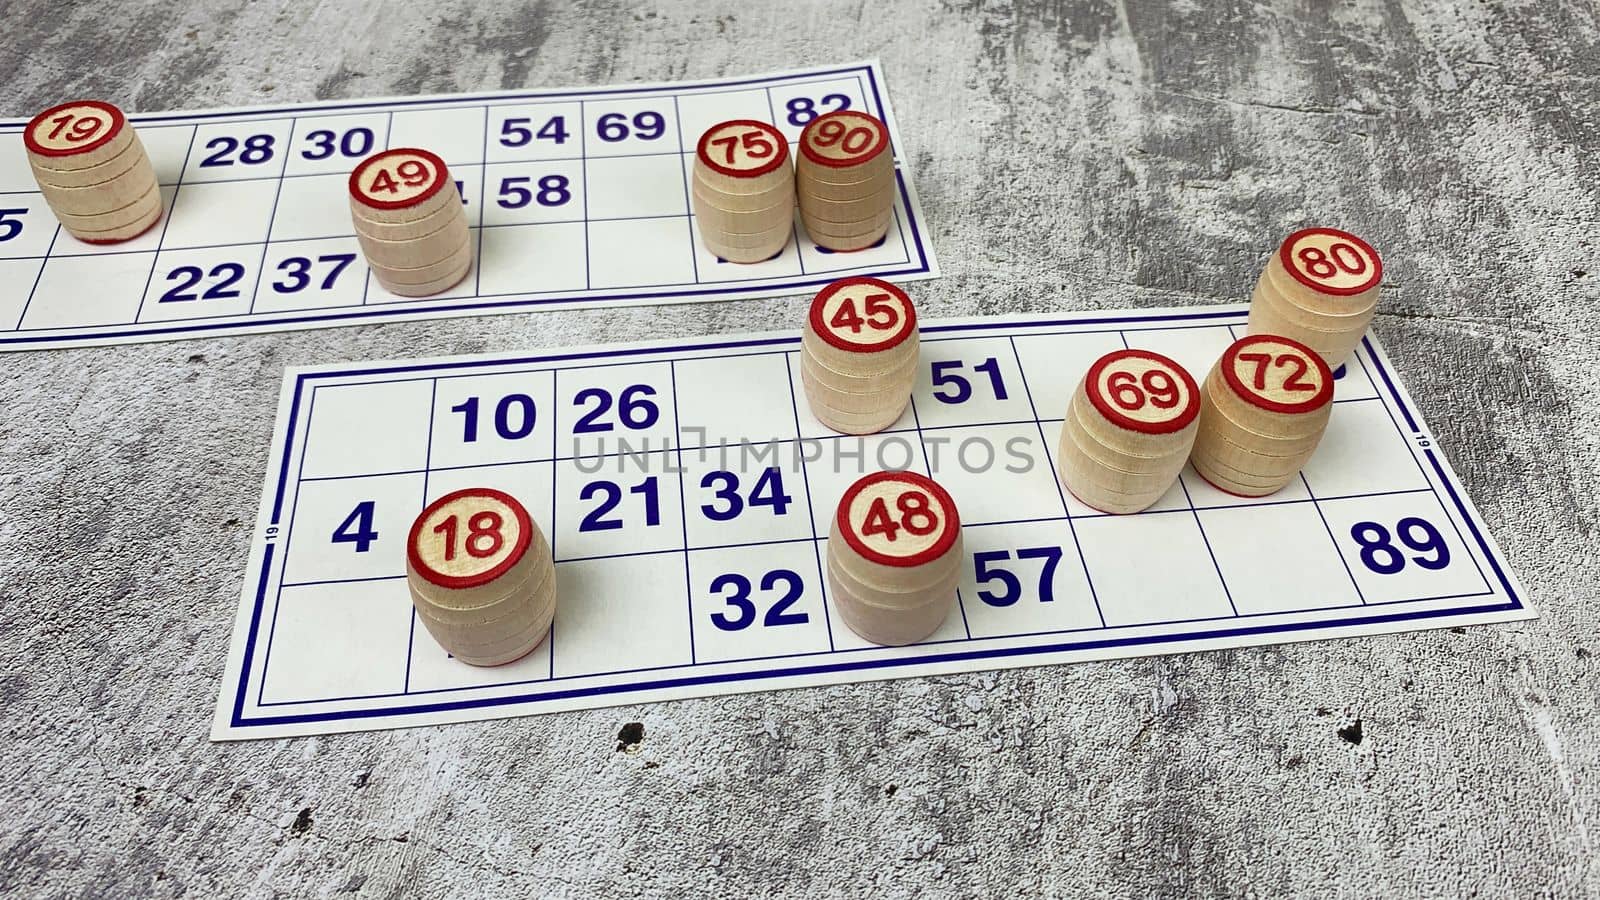 Loto game on the table. Wooden barrels for a board game with family and friends